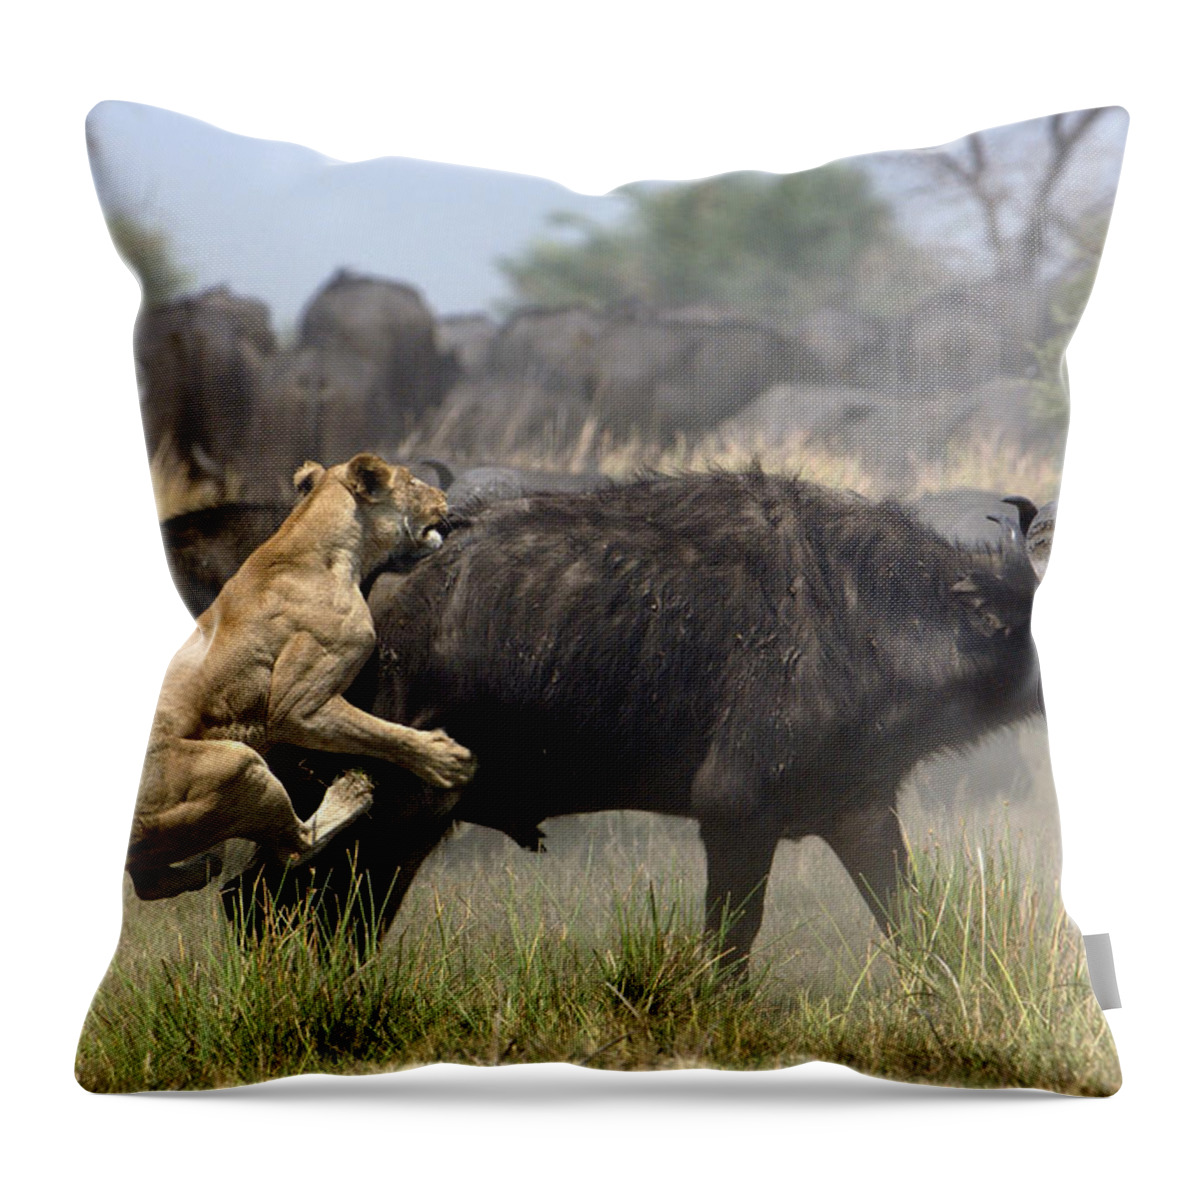 Feb0514 Throw Pillow featuring the photograph African Lion Attacking Cape Buffalo by Pete Oxford